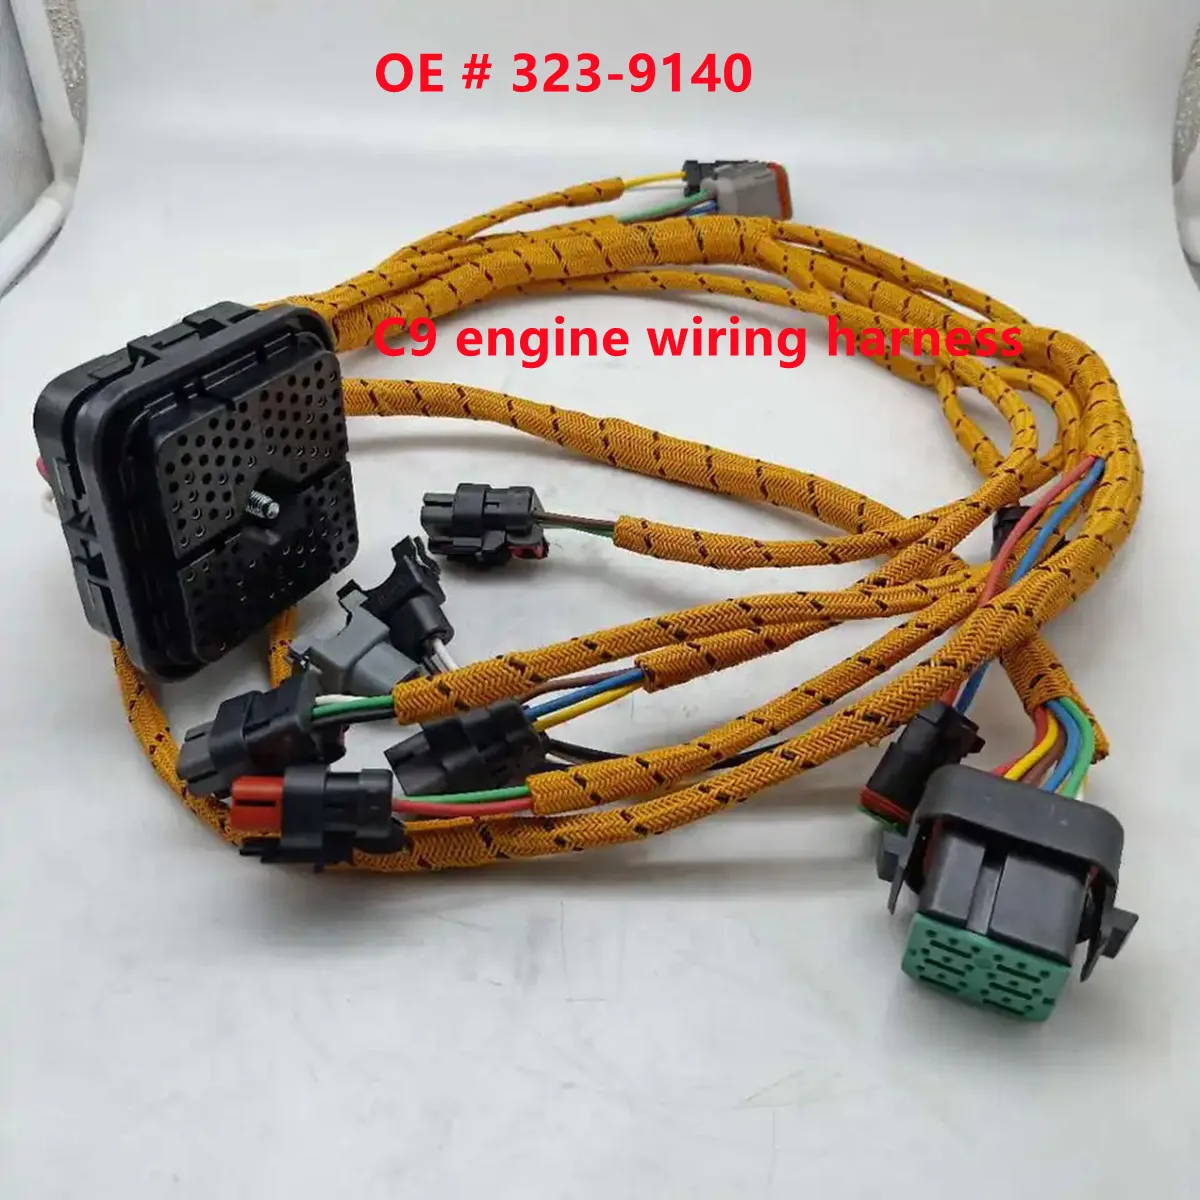 323-9140 3239140  New Engine Wiring Harness for CAT Excavator 330D/336D C9 Engin - £359.96 GBP